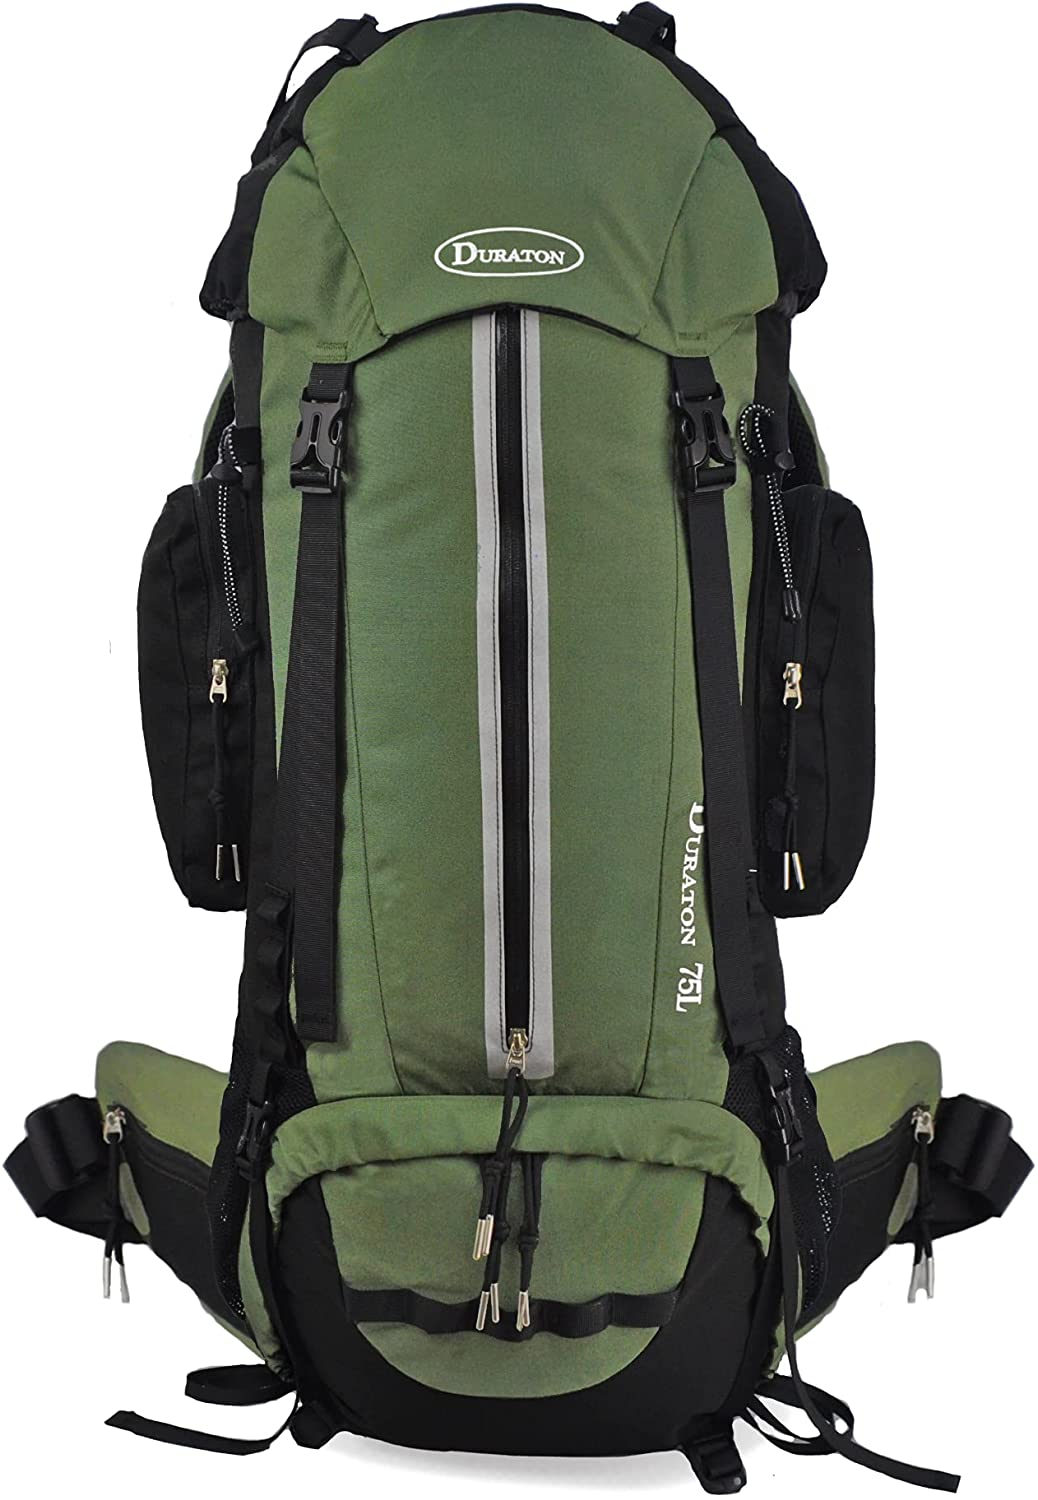 Duraton 75 ltr. Backpacking Backpack, Green, Adult Unisex, Size: 75 Liters